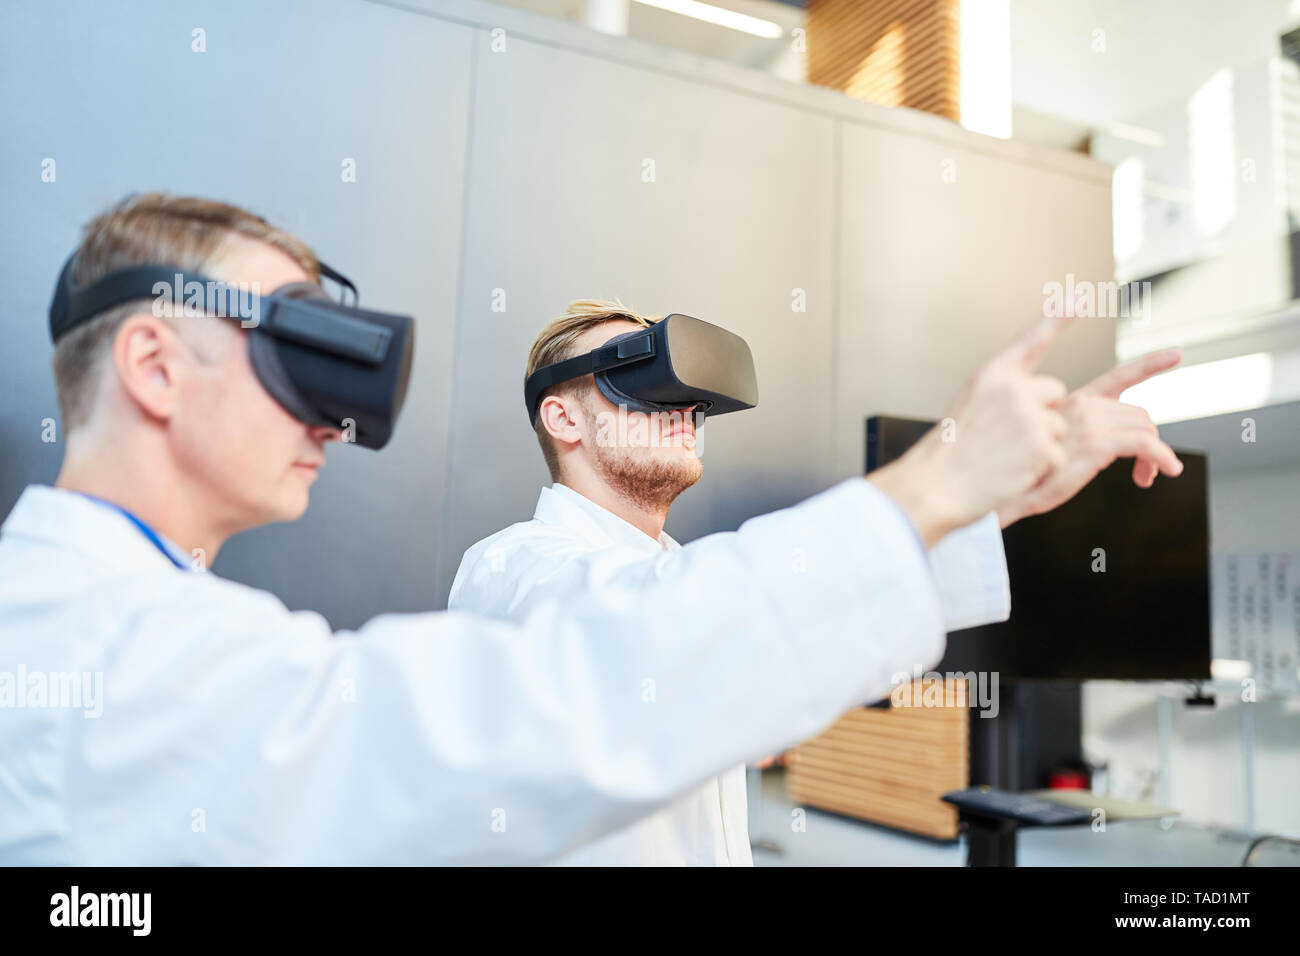 Scientists train with virtual reality glasses for medicine research Stock Photo